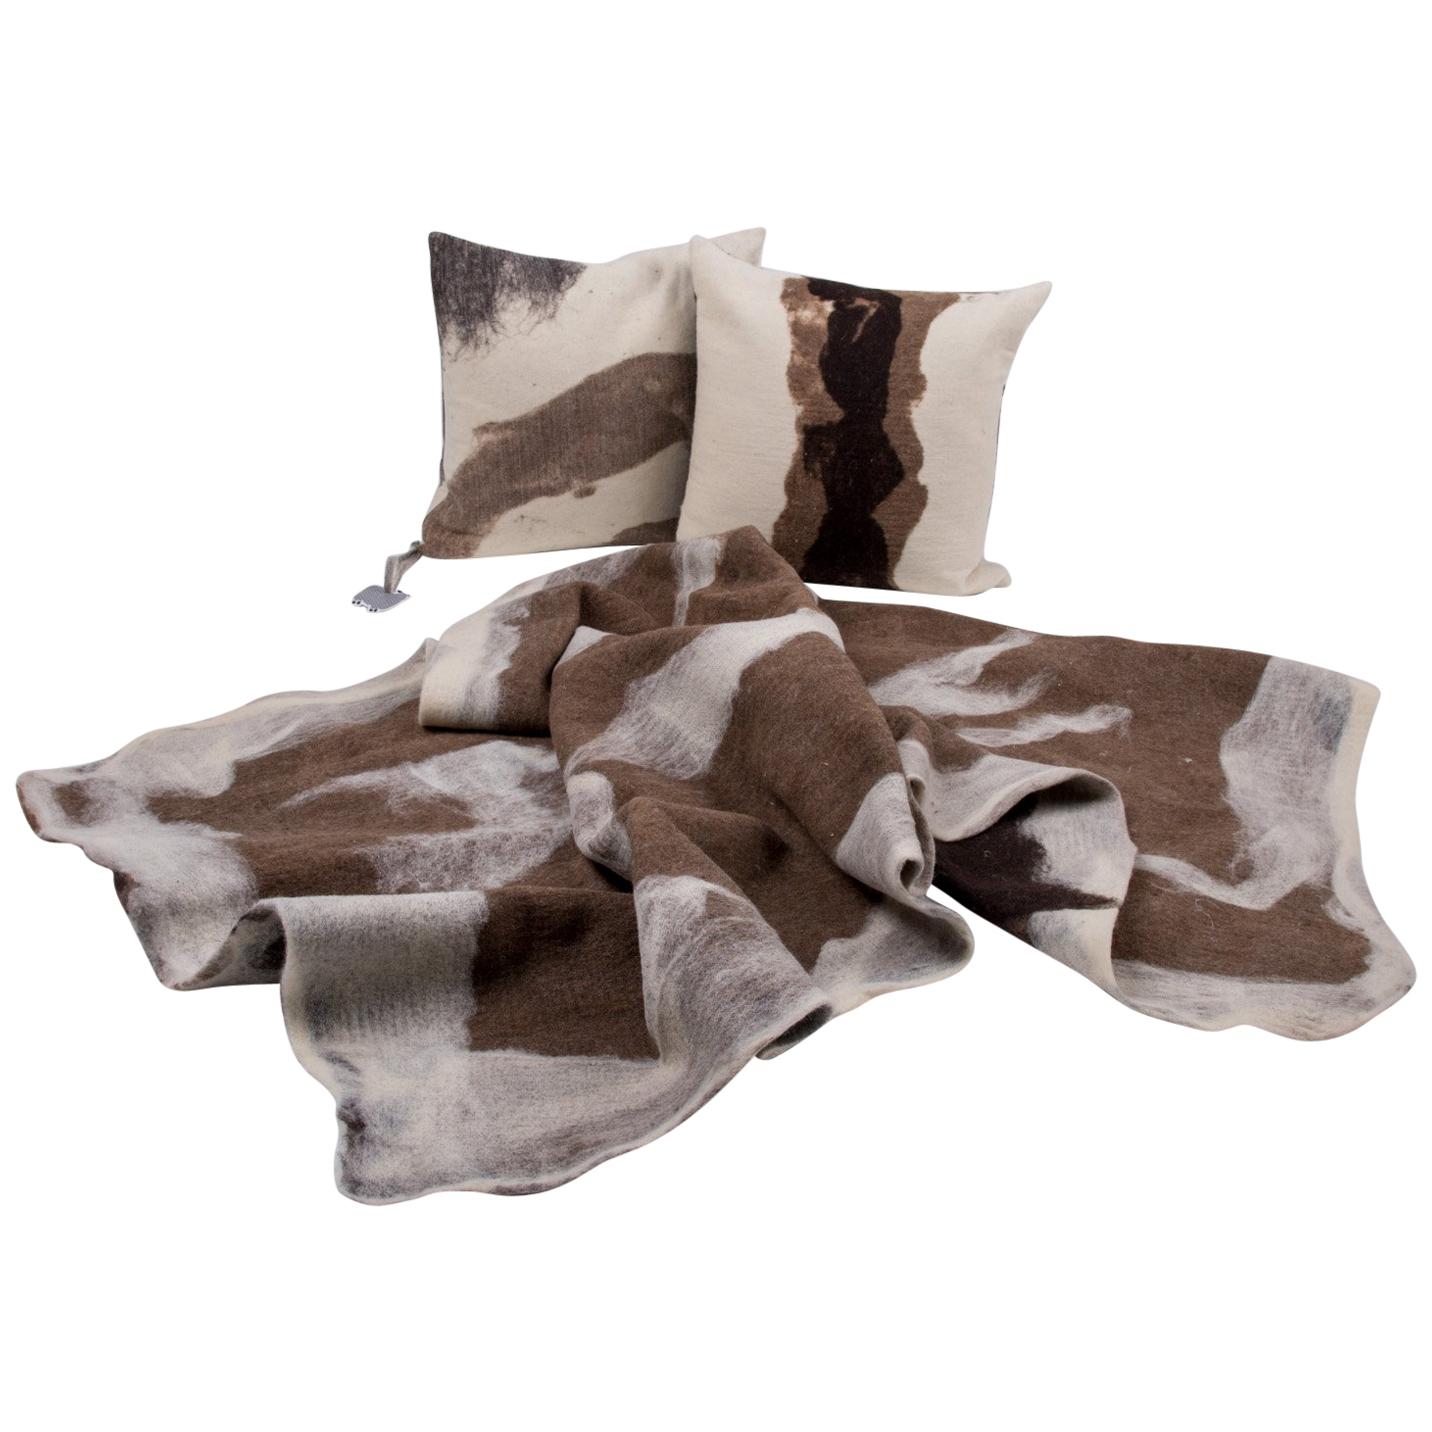 Hand-Milled Artisan Wool Pillows and Rustic Throw, Tahoe Collection